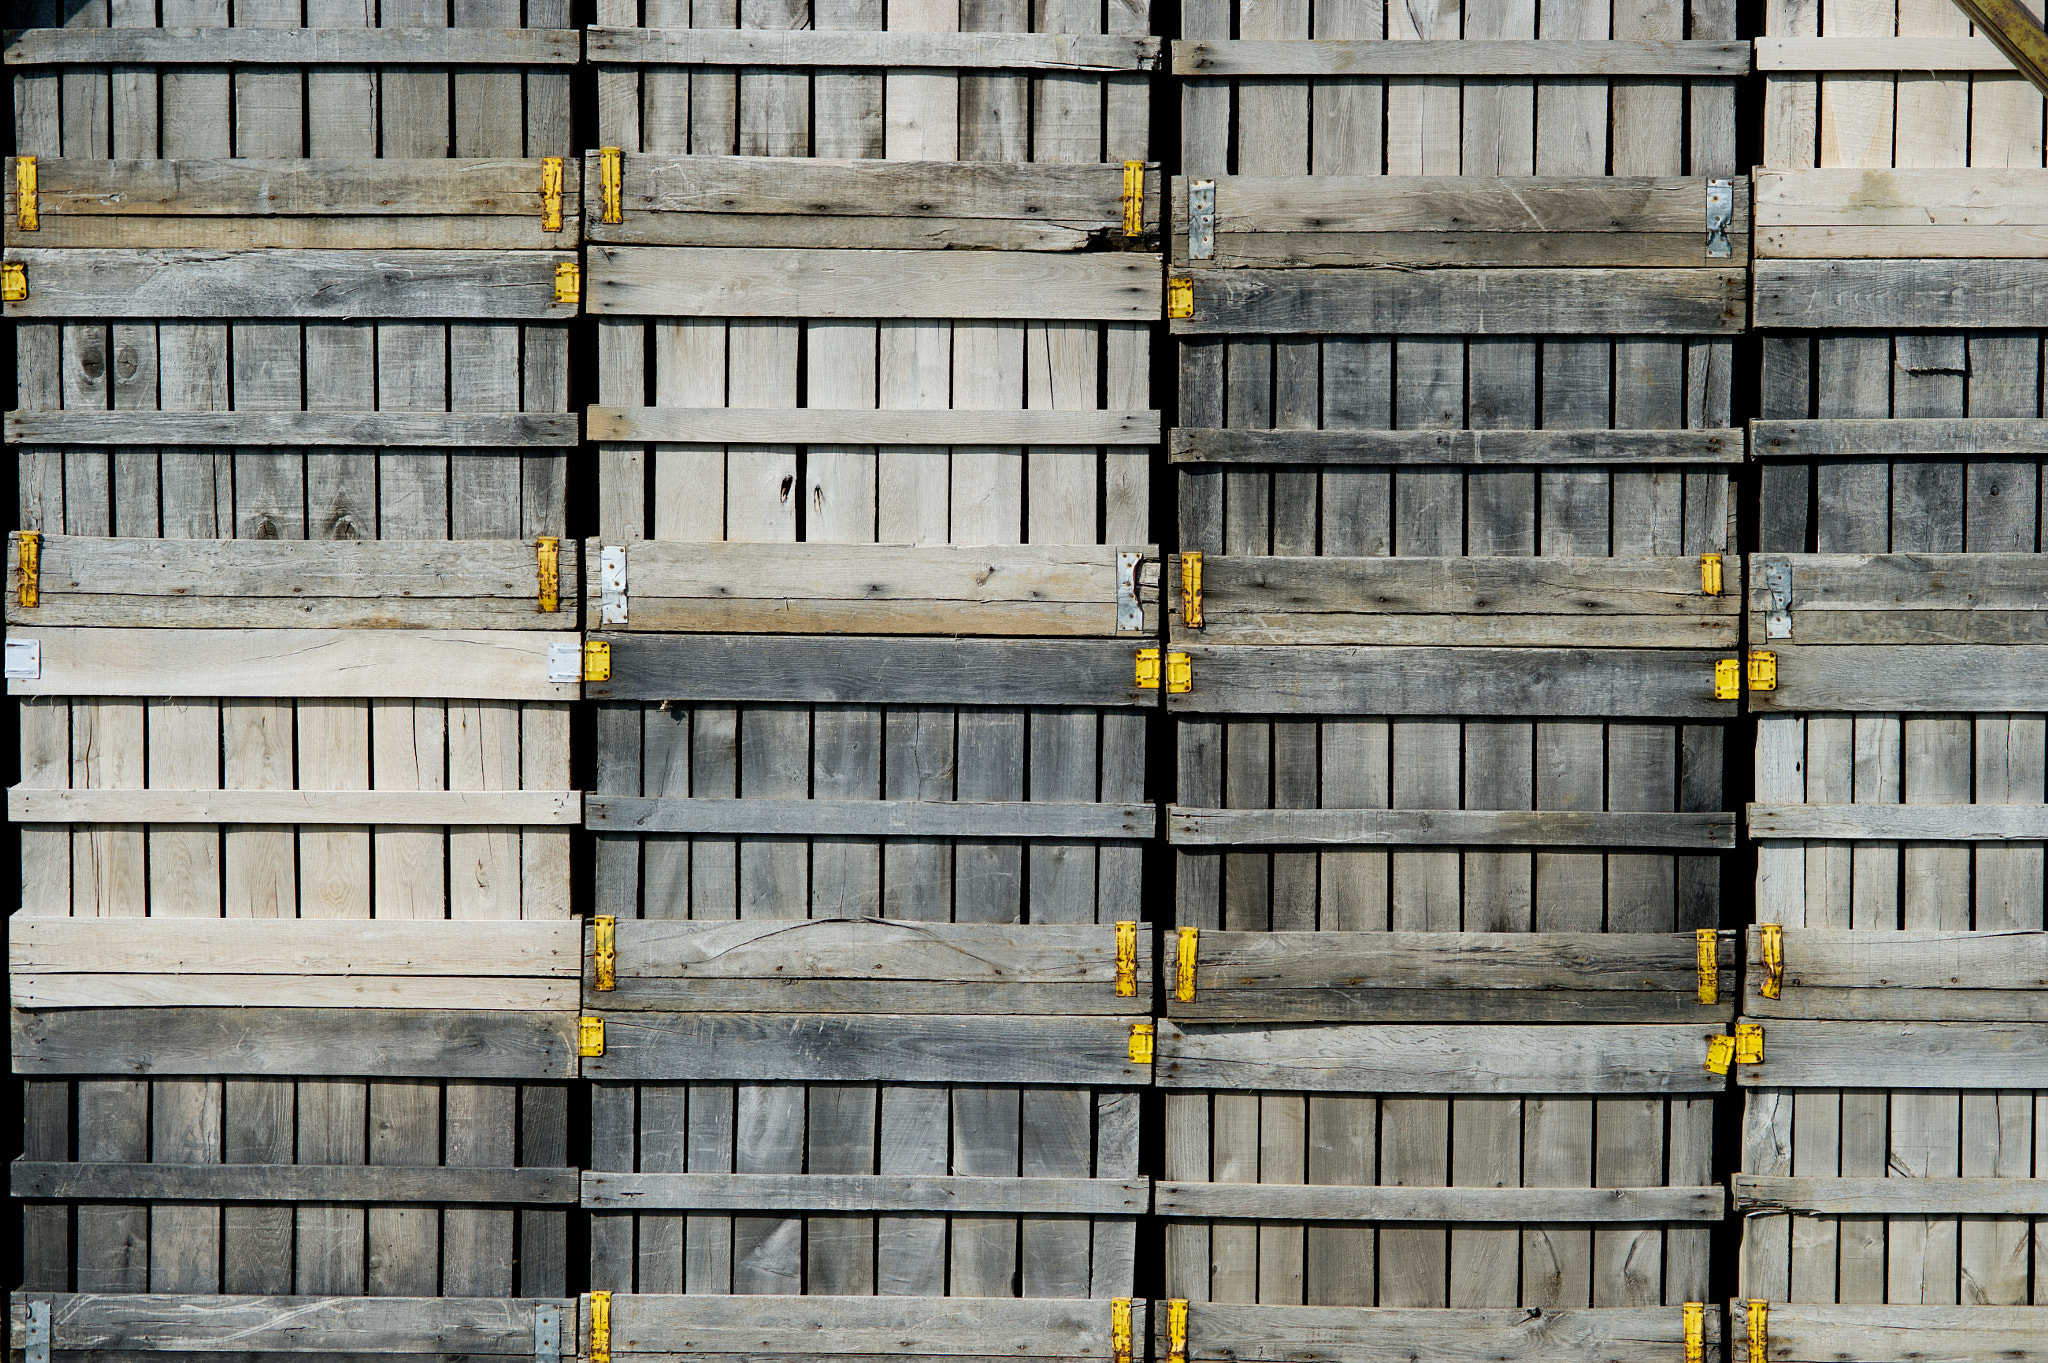 Nikon D3S sample photo. Stacked crates for produce on farm photography